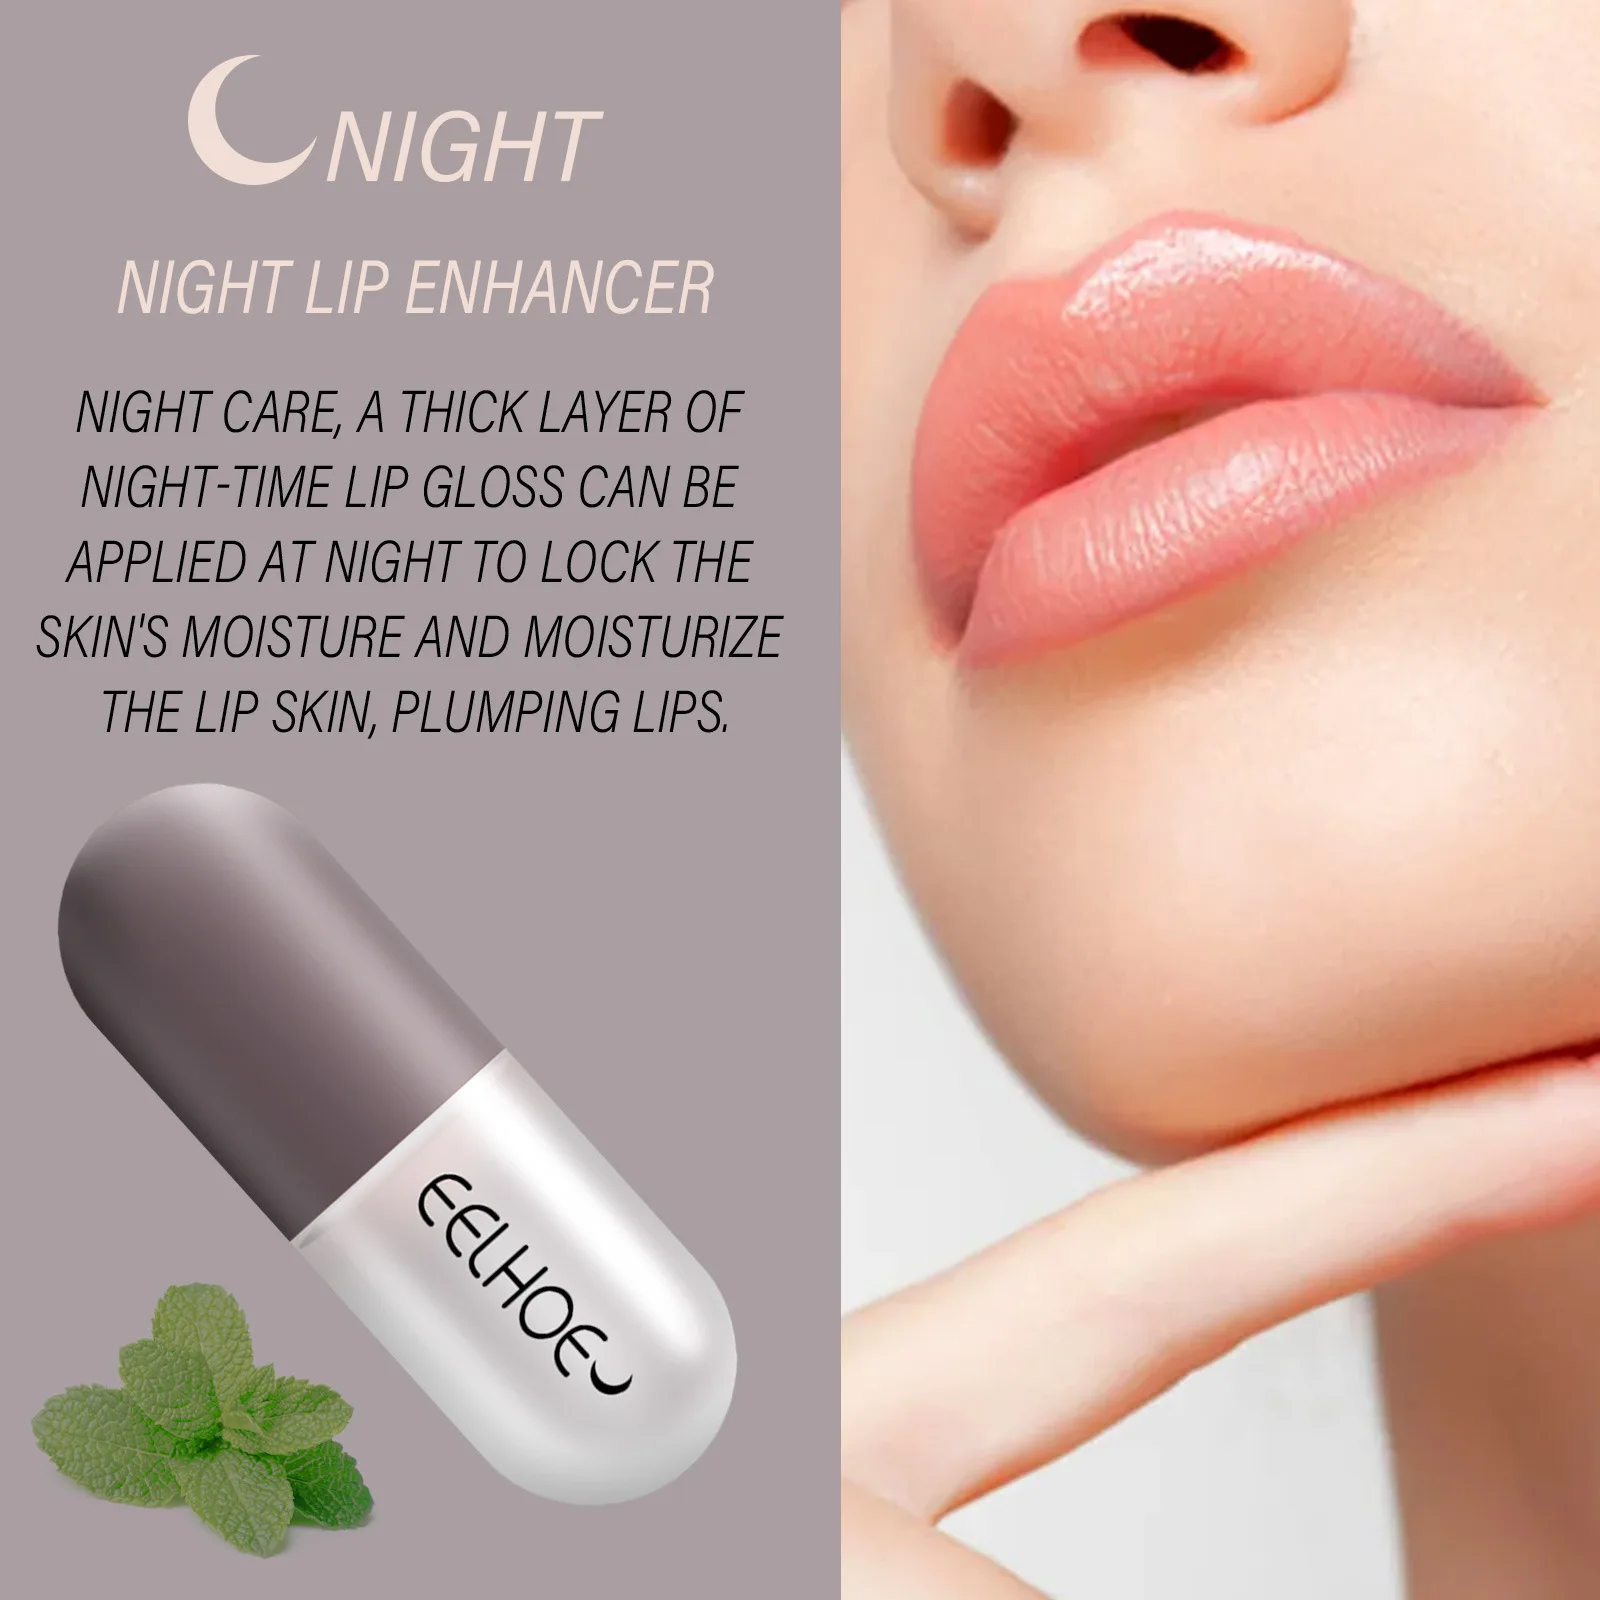 Make Your Lips Look Plump, Plump, And Hydrated With a Day And Night Moisturizing Elastic Lip Plumper Set